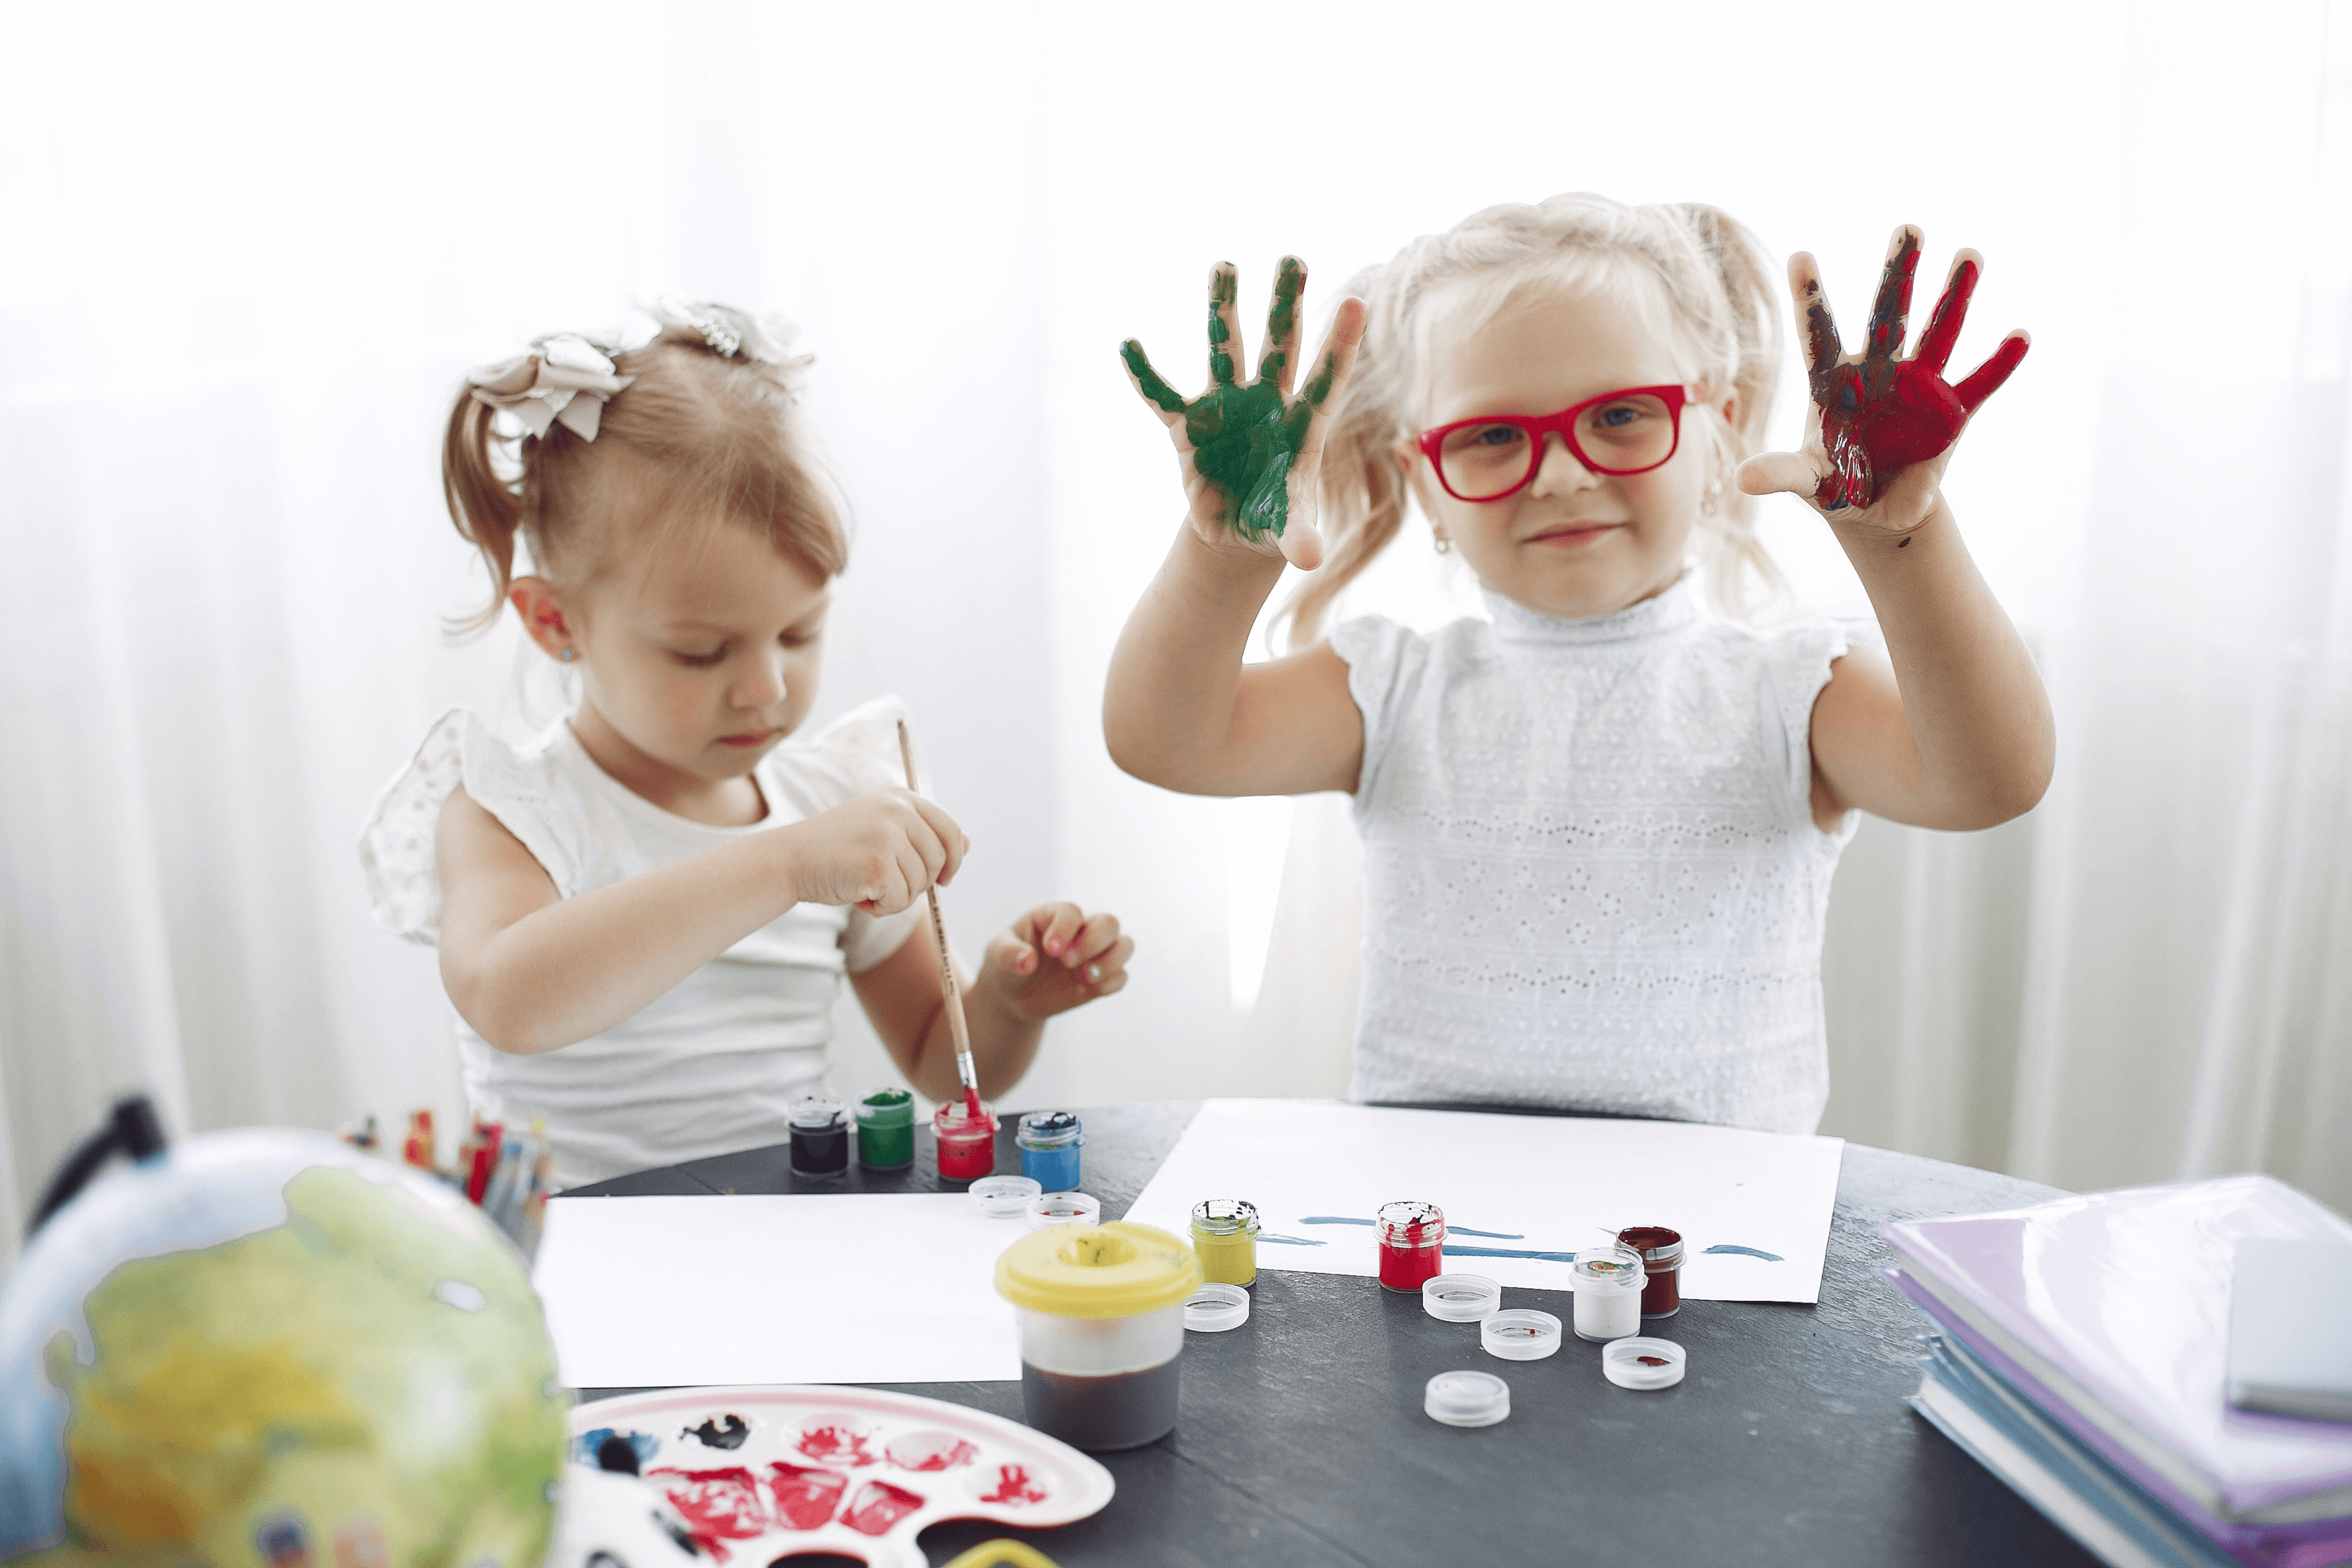 Preschoolers with hands painted with paint